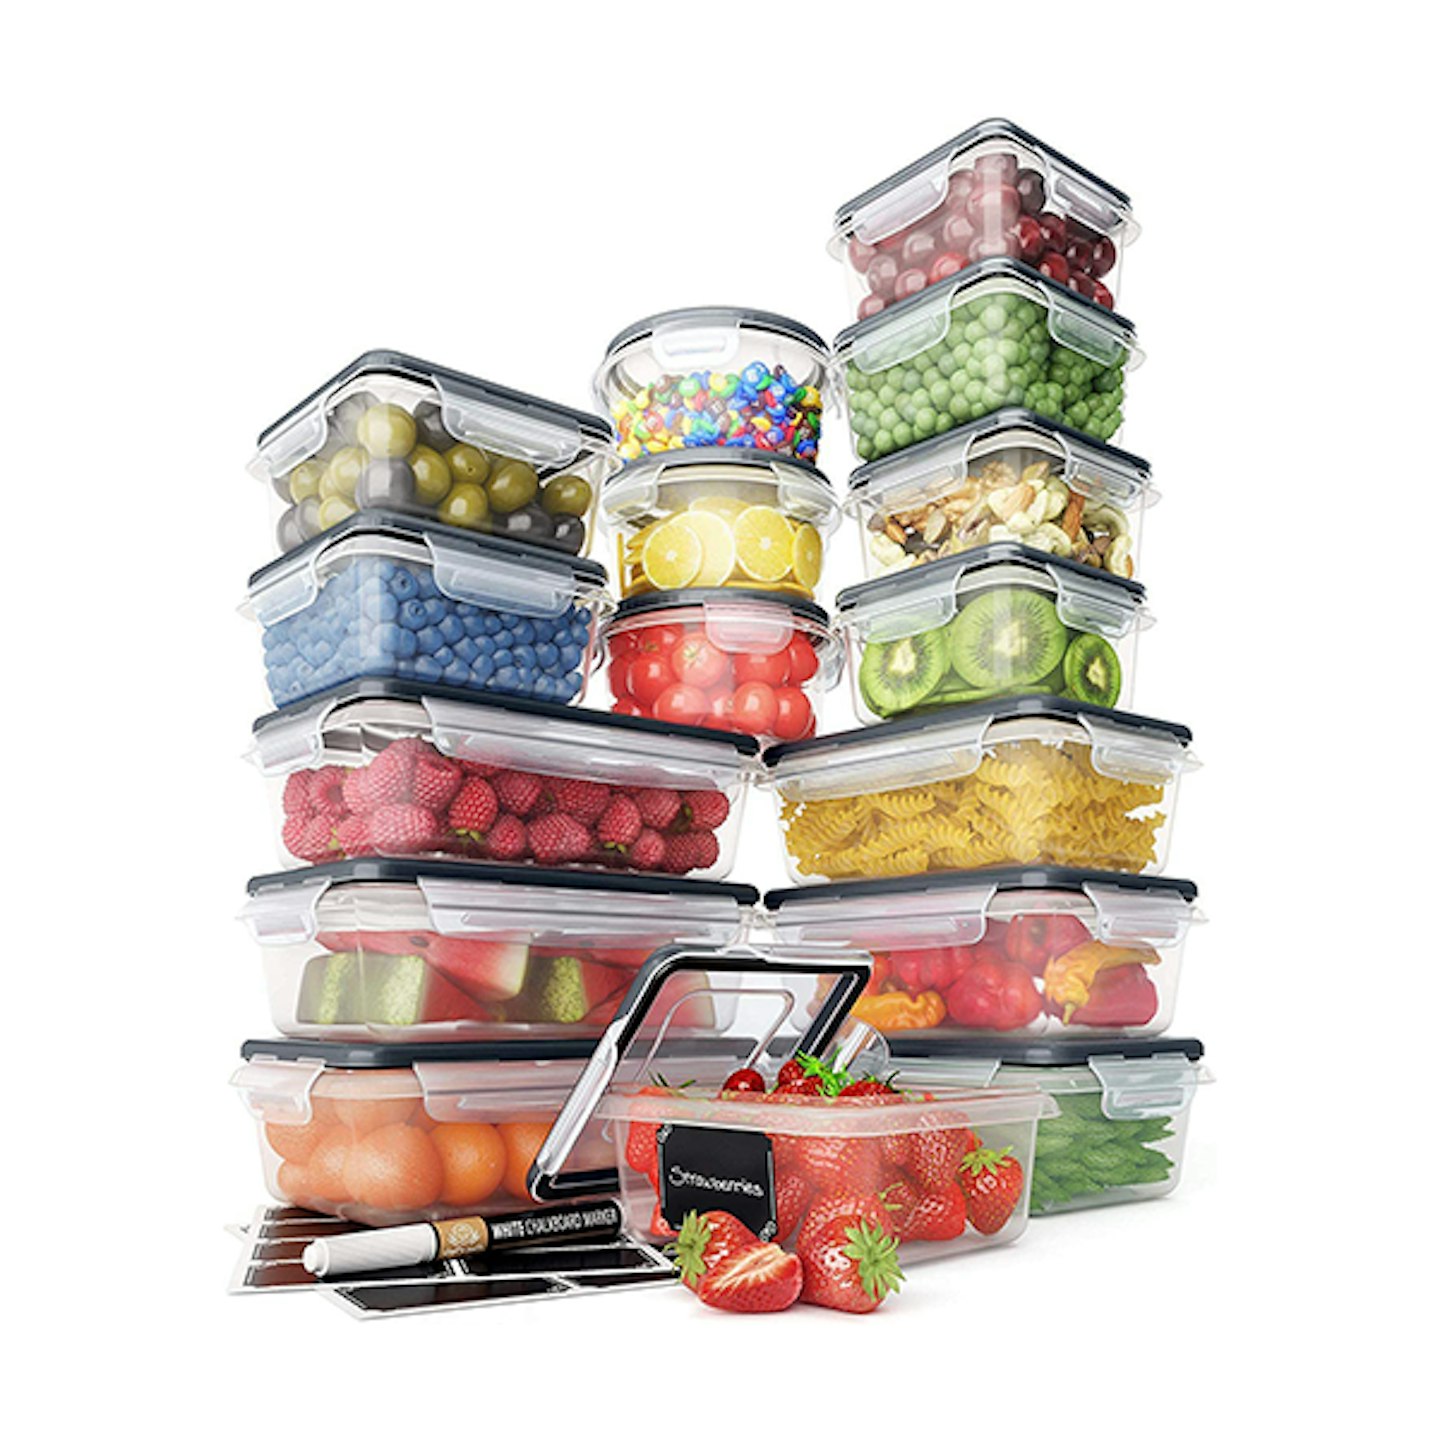 Food Storage Containers Set - Airtight Plastic Containers with Easy Snap Lids (16 Pack)